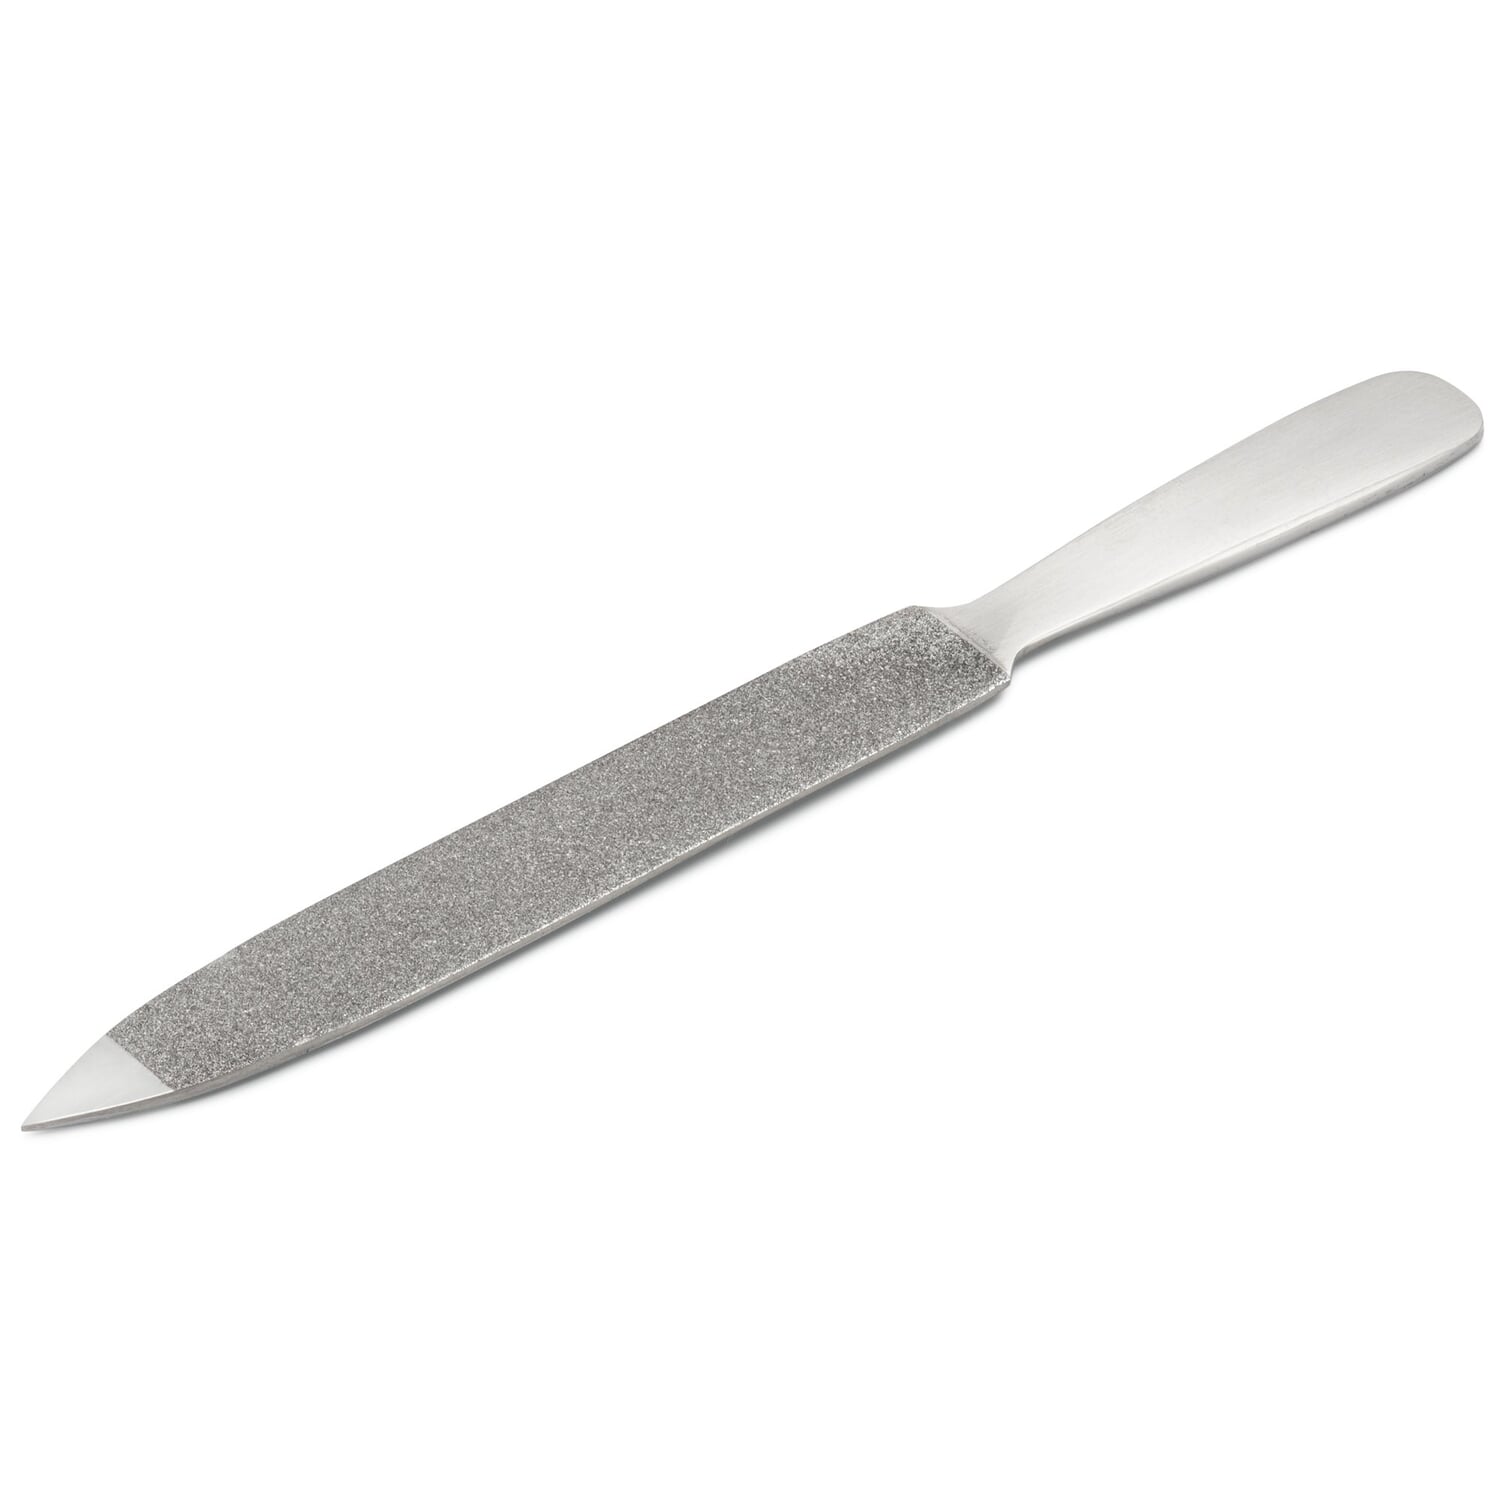 Sapphire nail file stainless steel | Manufactum